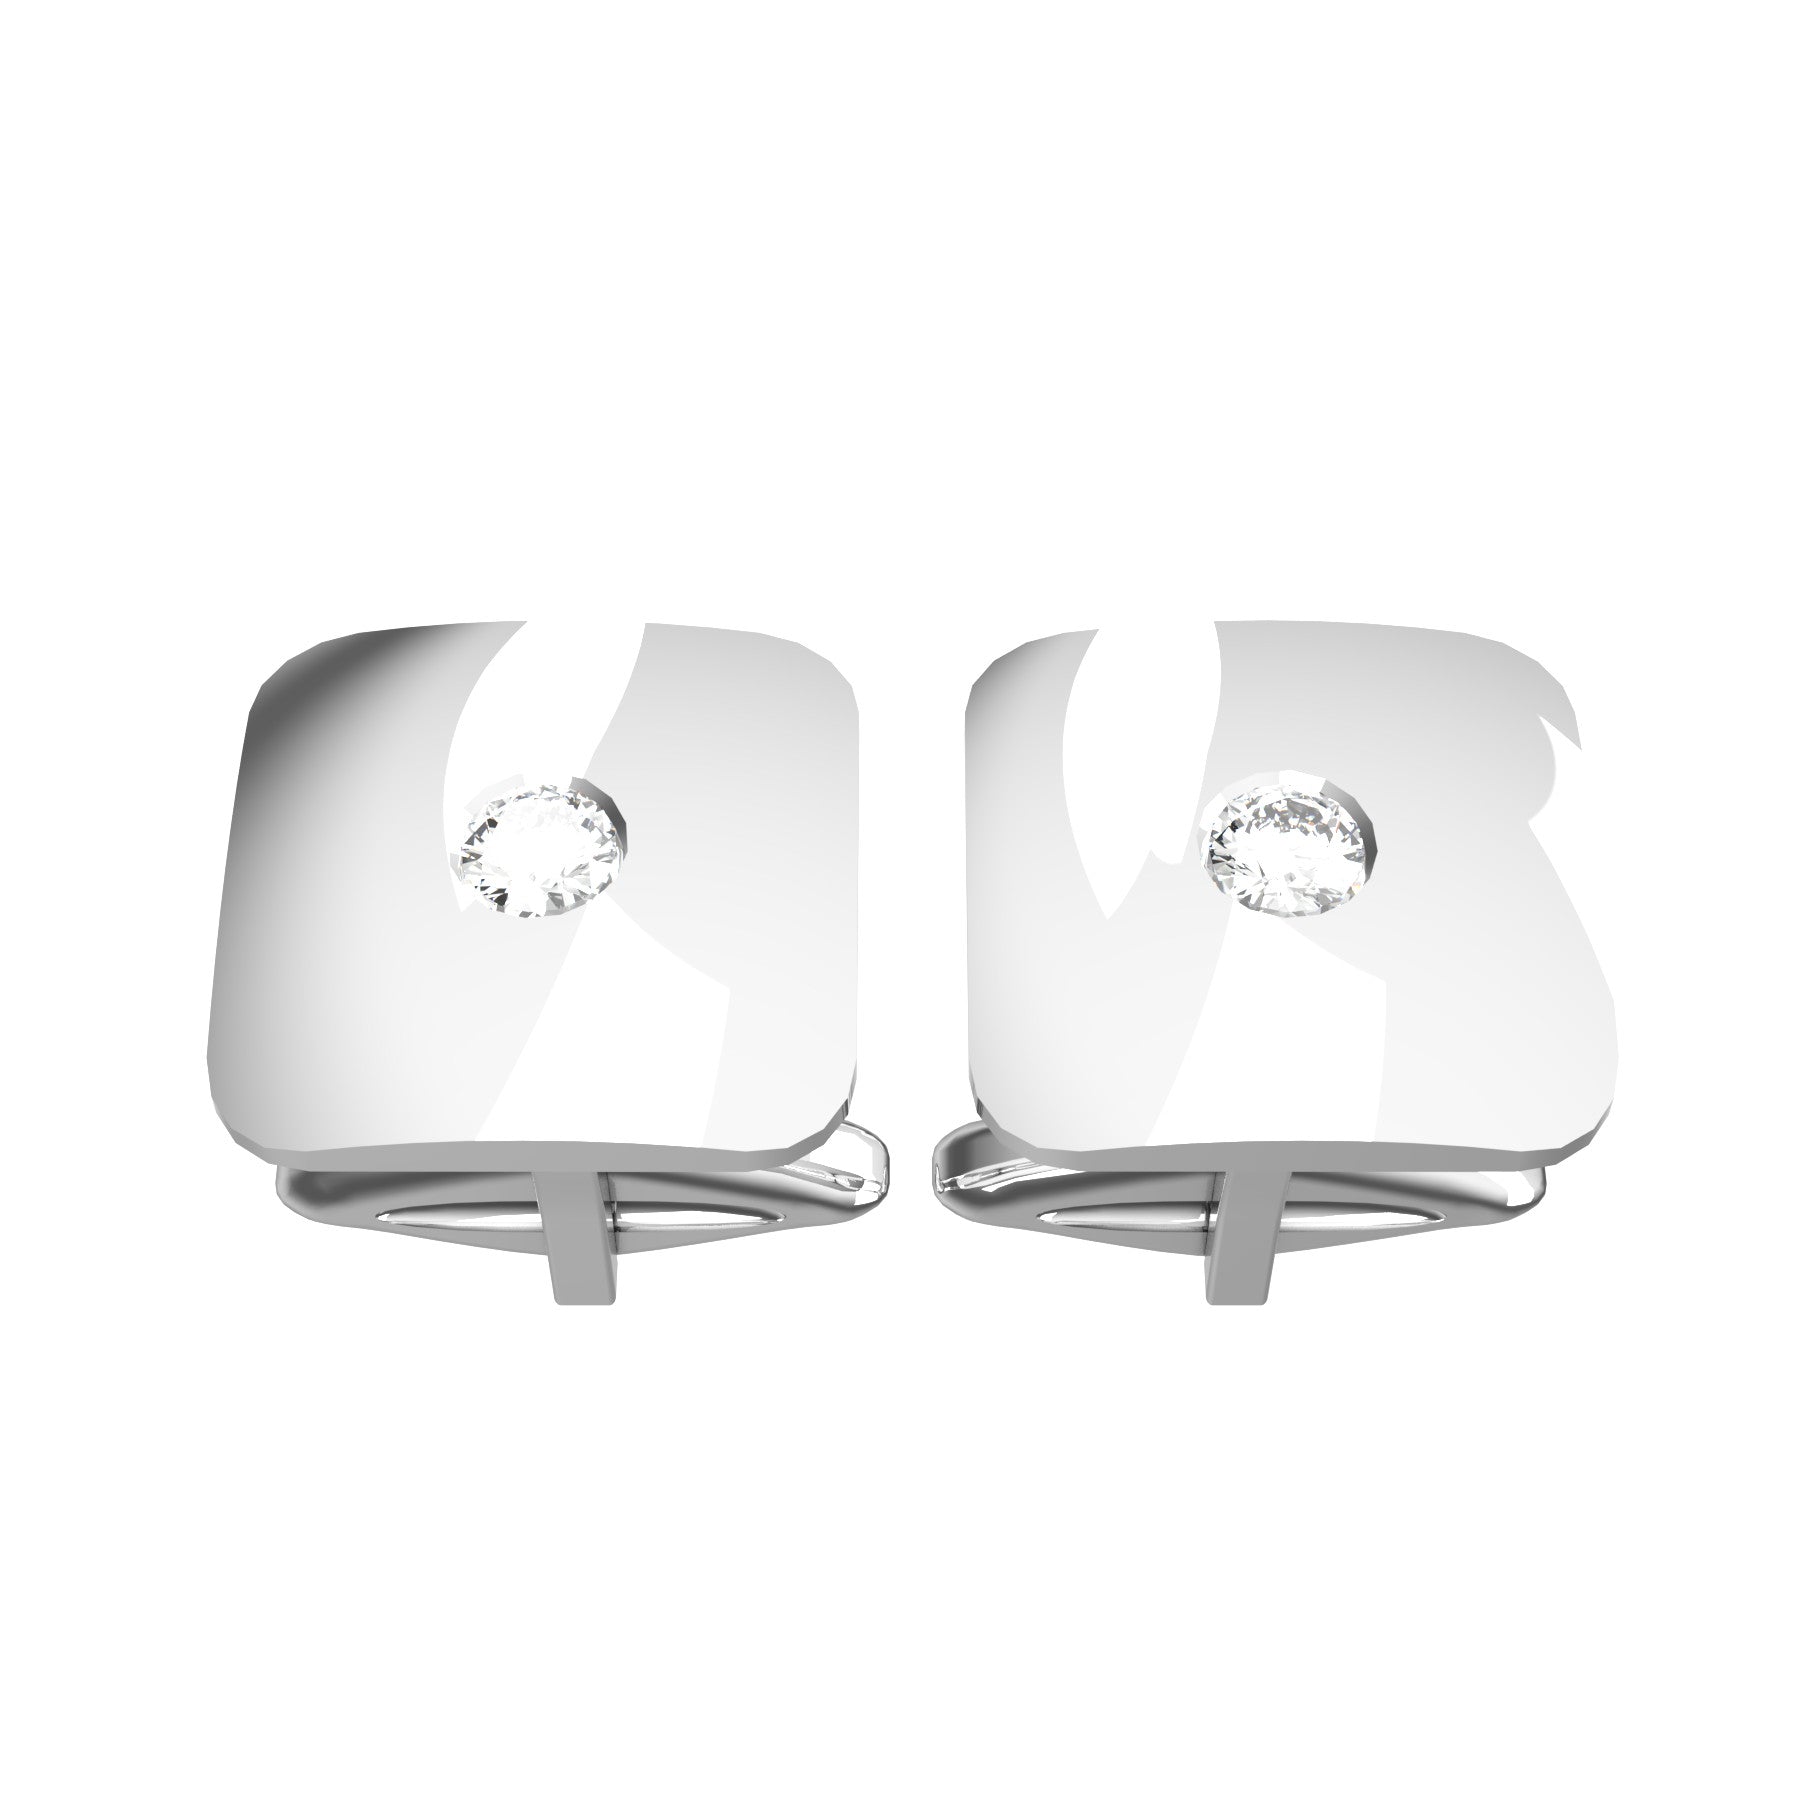 rounded square cufflinks, 18 K white gold, round natural diamonds, weight about 14,8 g. (0.52 oz), size 15x15x2,5 mm